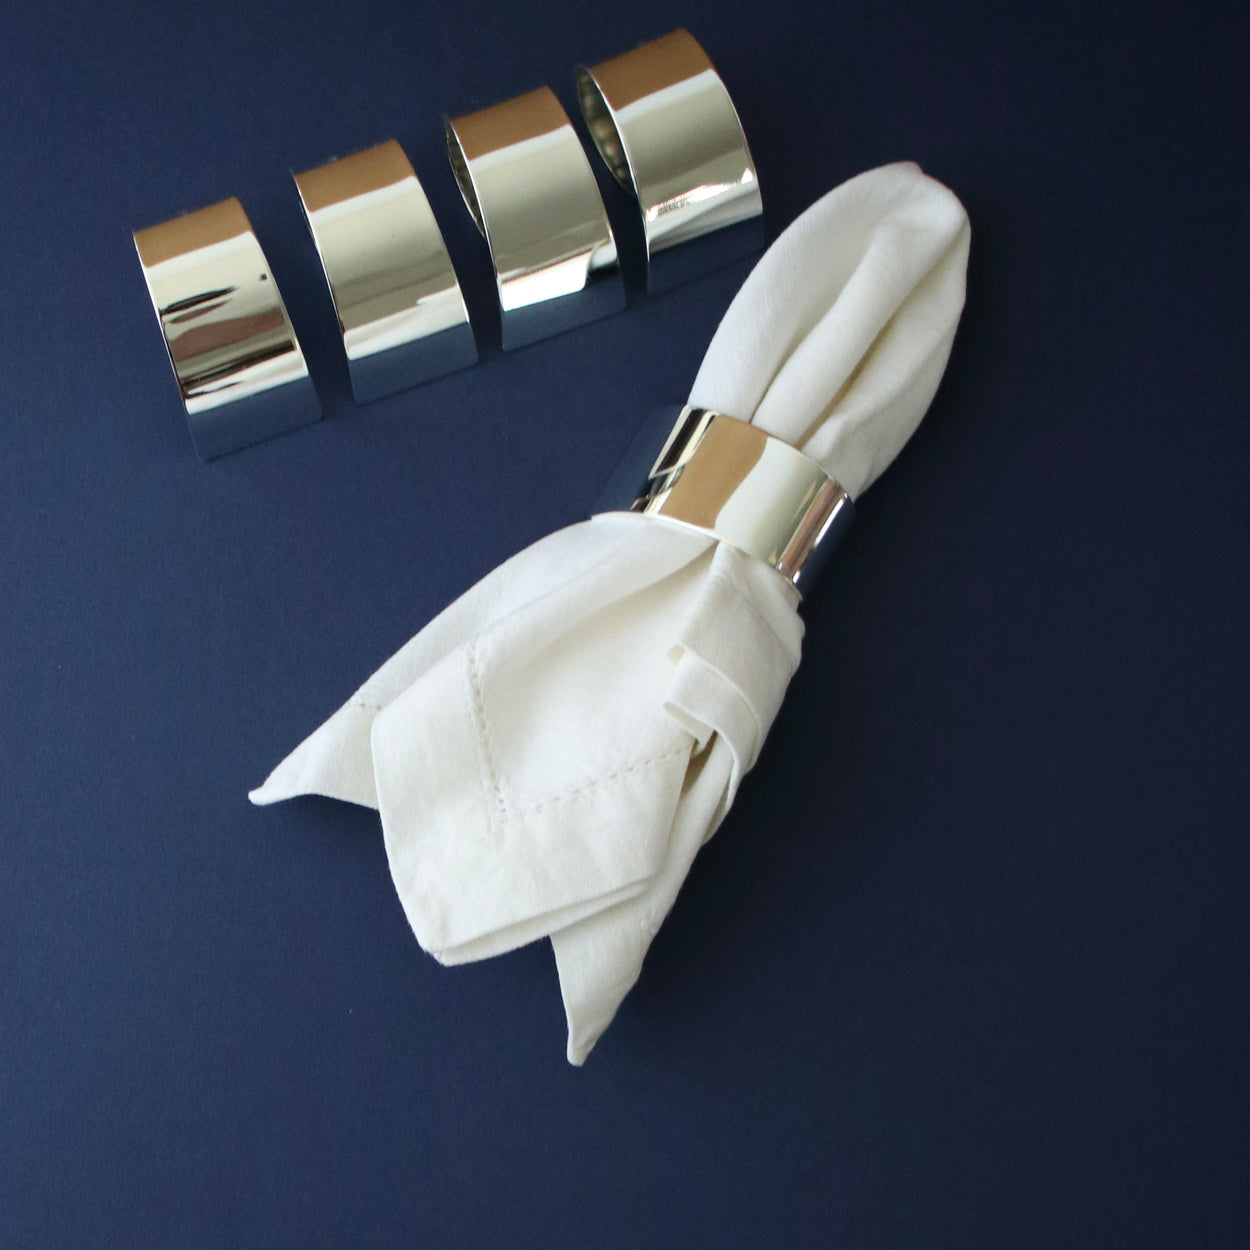 Vintage set of 4 silver plate napkin rings against dark blue backdrop, with white napkin.